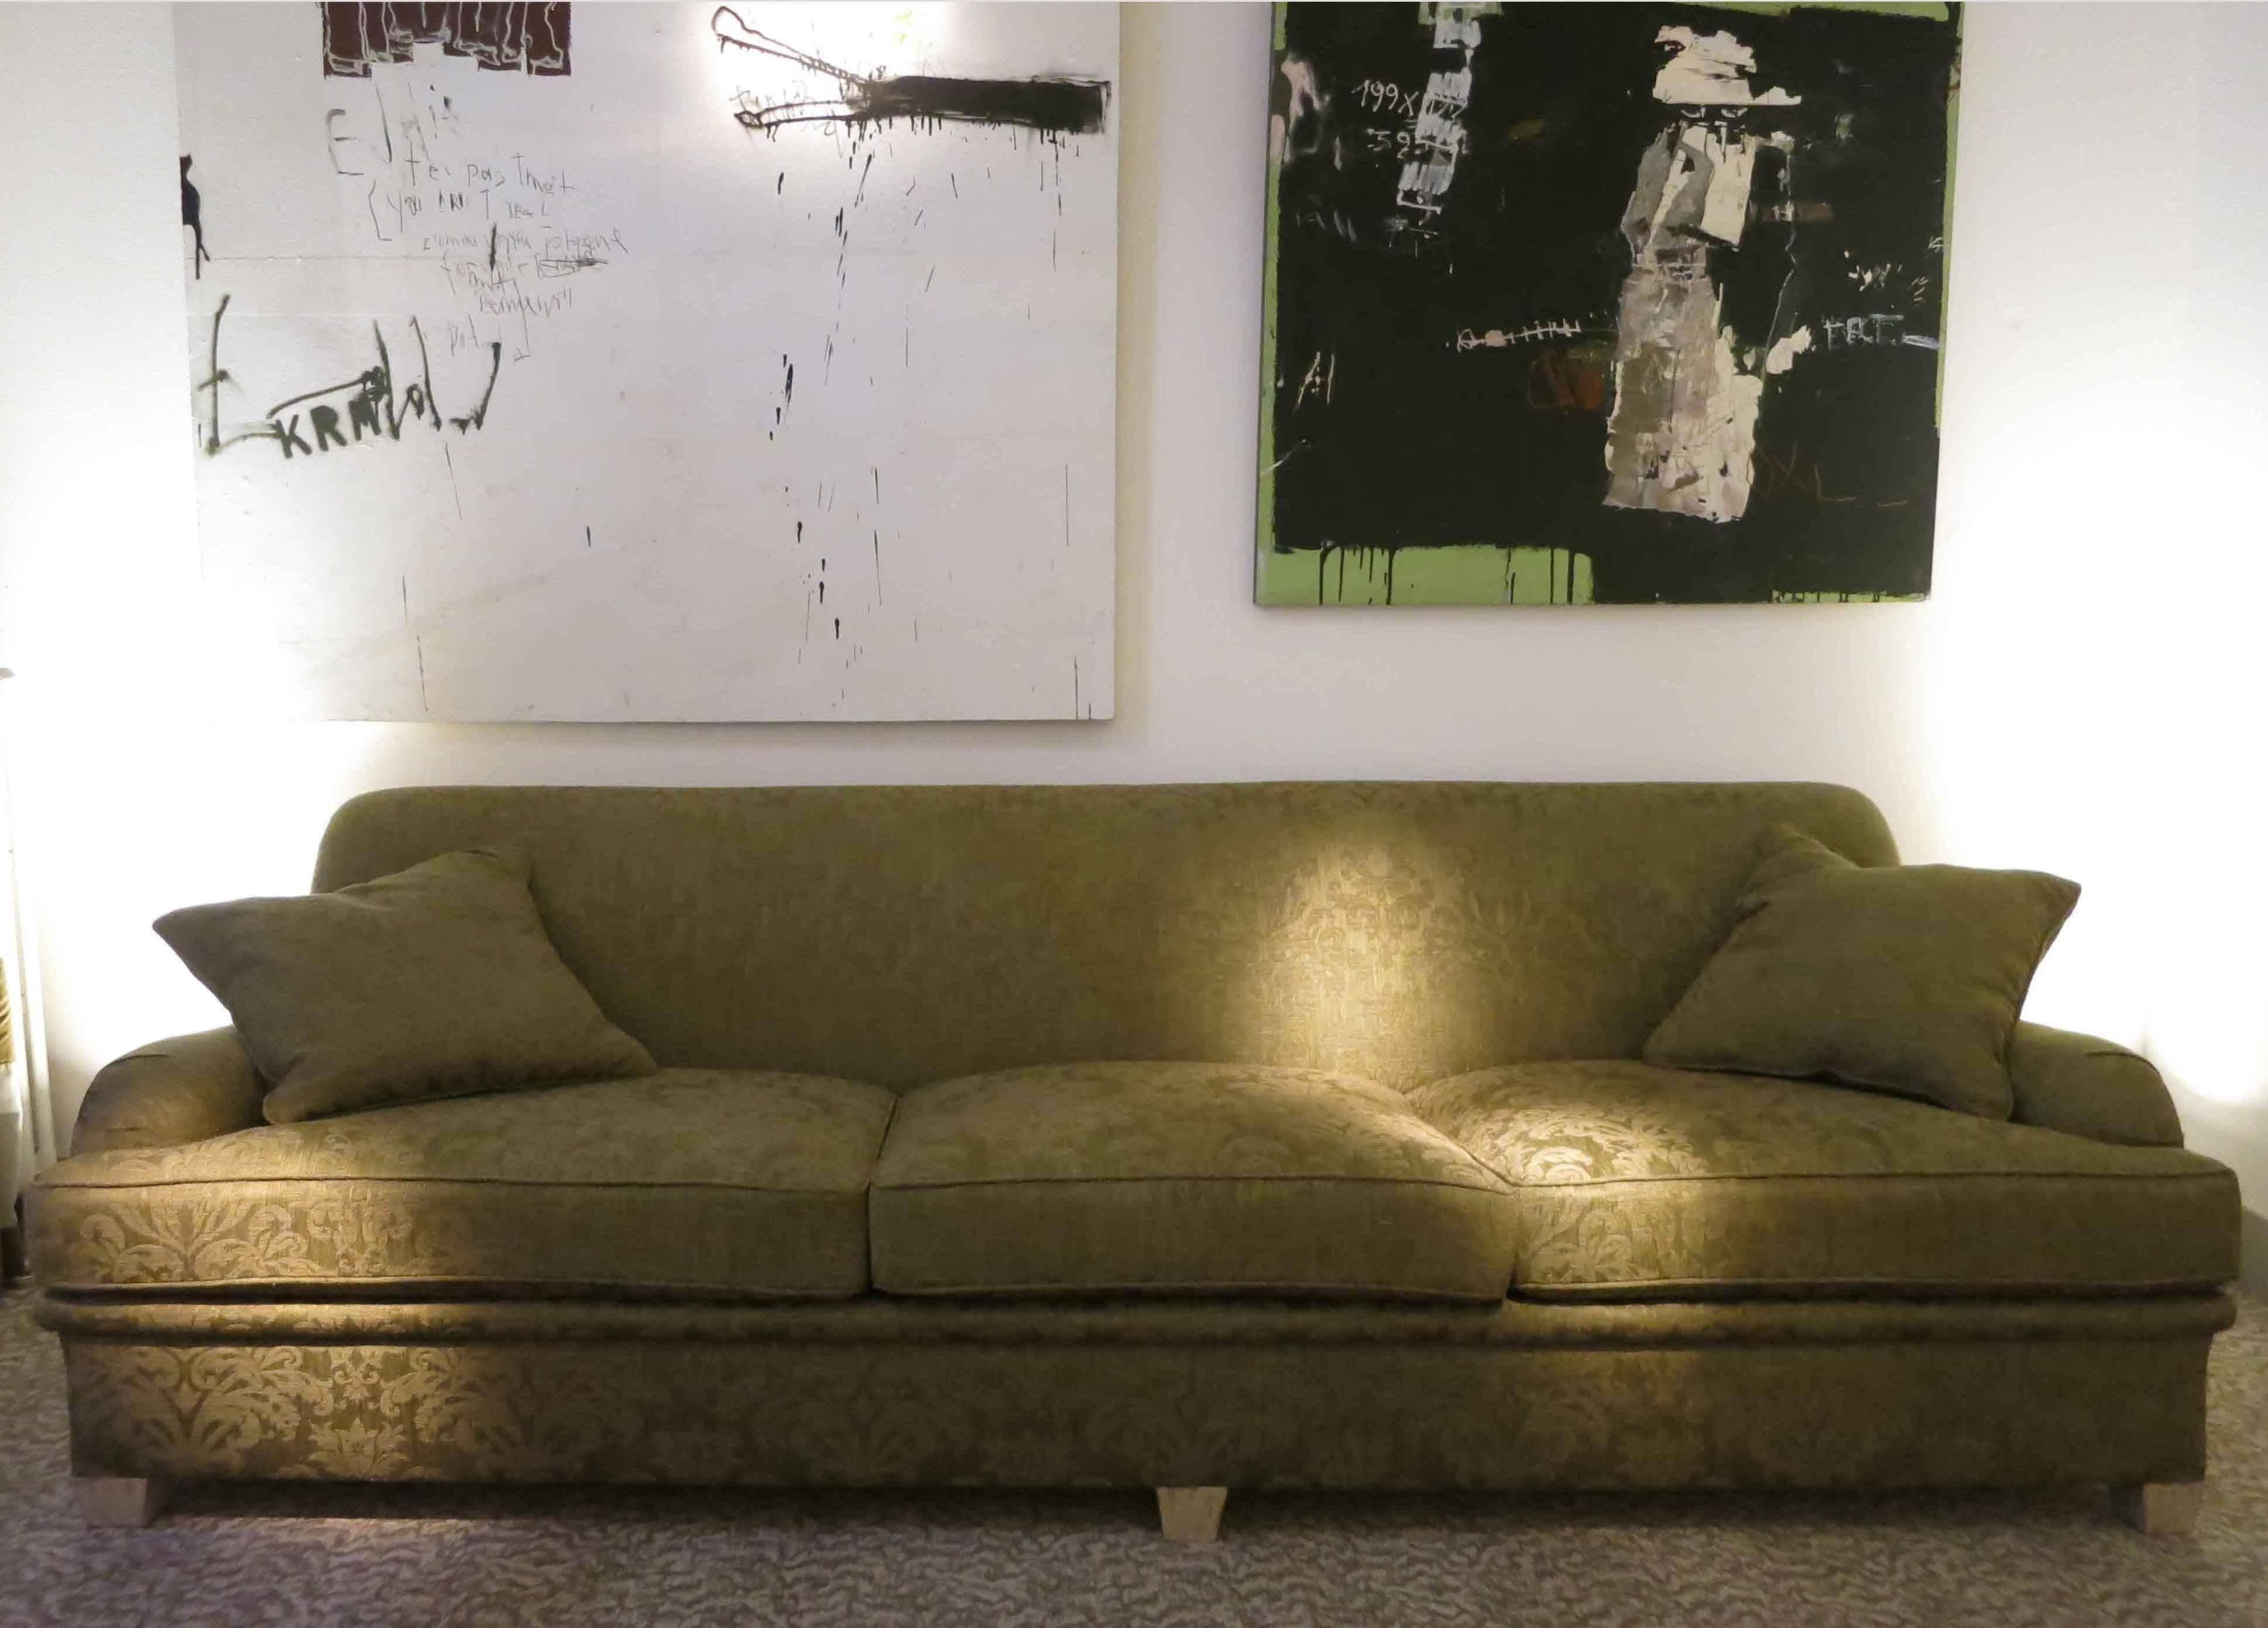 Huge sofa by Maison Jansen from the 1960s
Legs in light grey patina wood.
The upholstery is new. The sofa is in perfect condition and very comfortable.
  